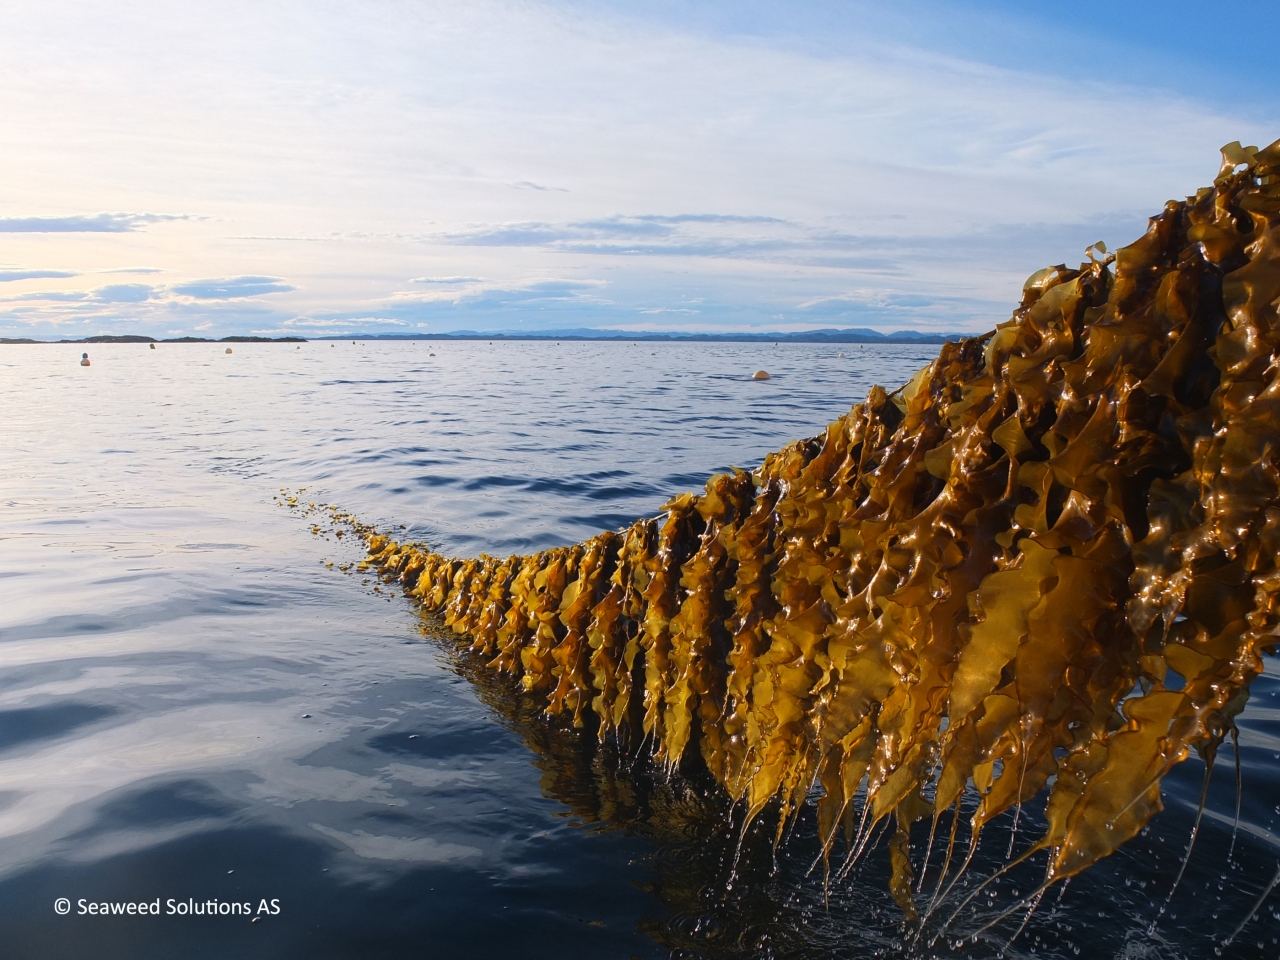 Kelp, the fastest growing plant in the world, may be a powerful nature-based solution to addressing climate change. Photo: Seaweed Solutions AS